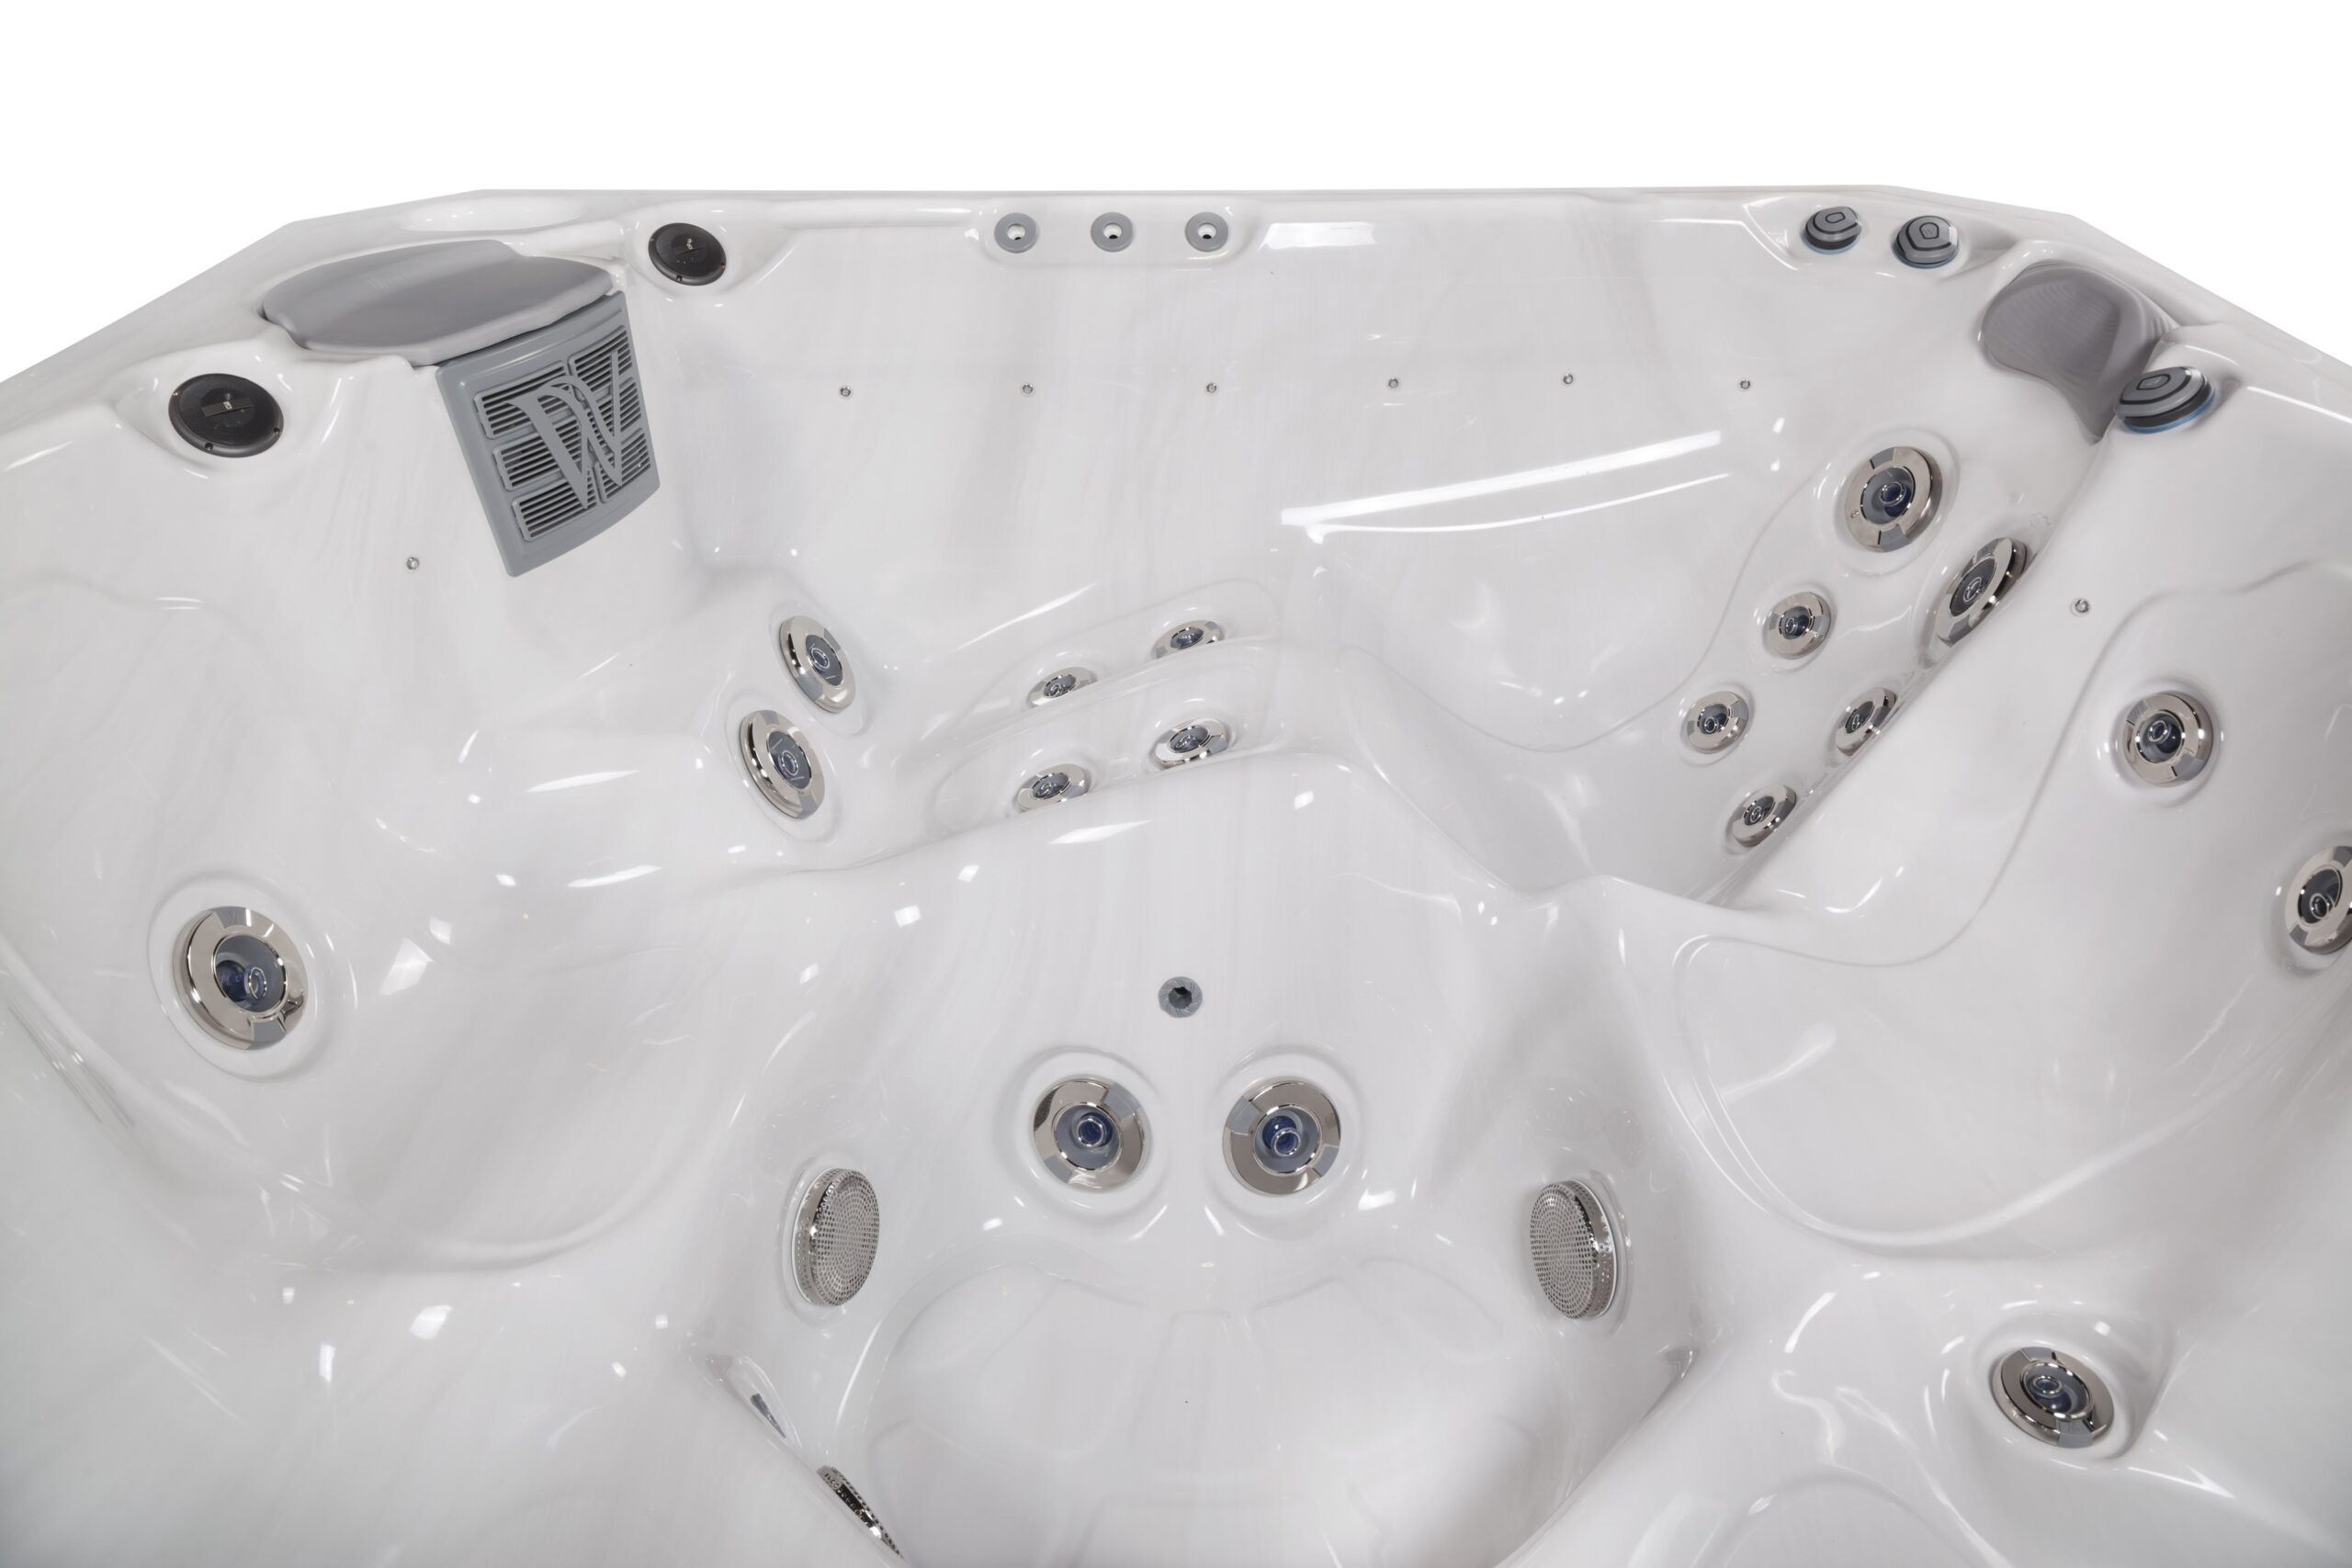 Hot tub hydrotherapy jets